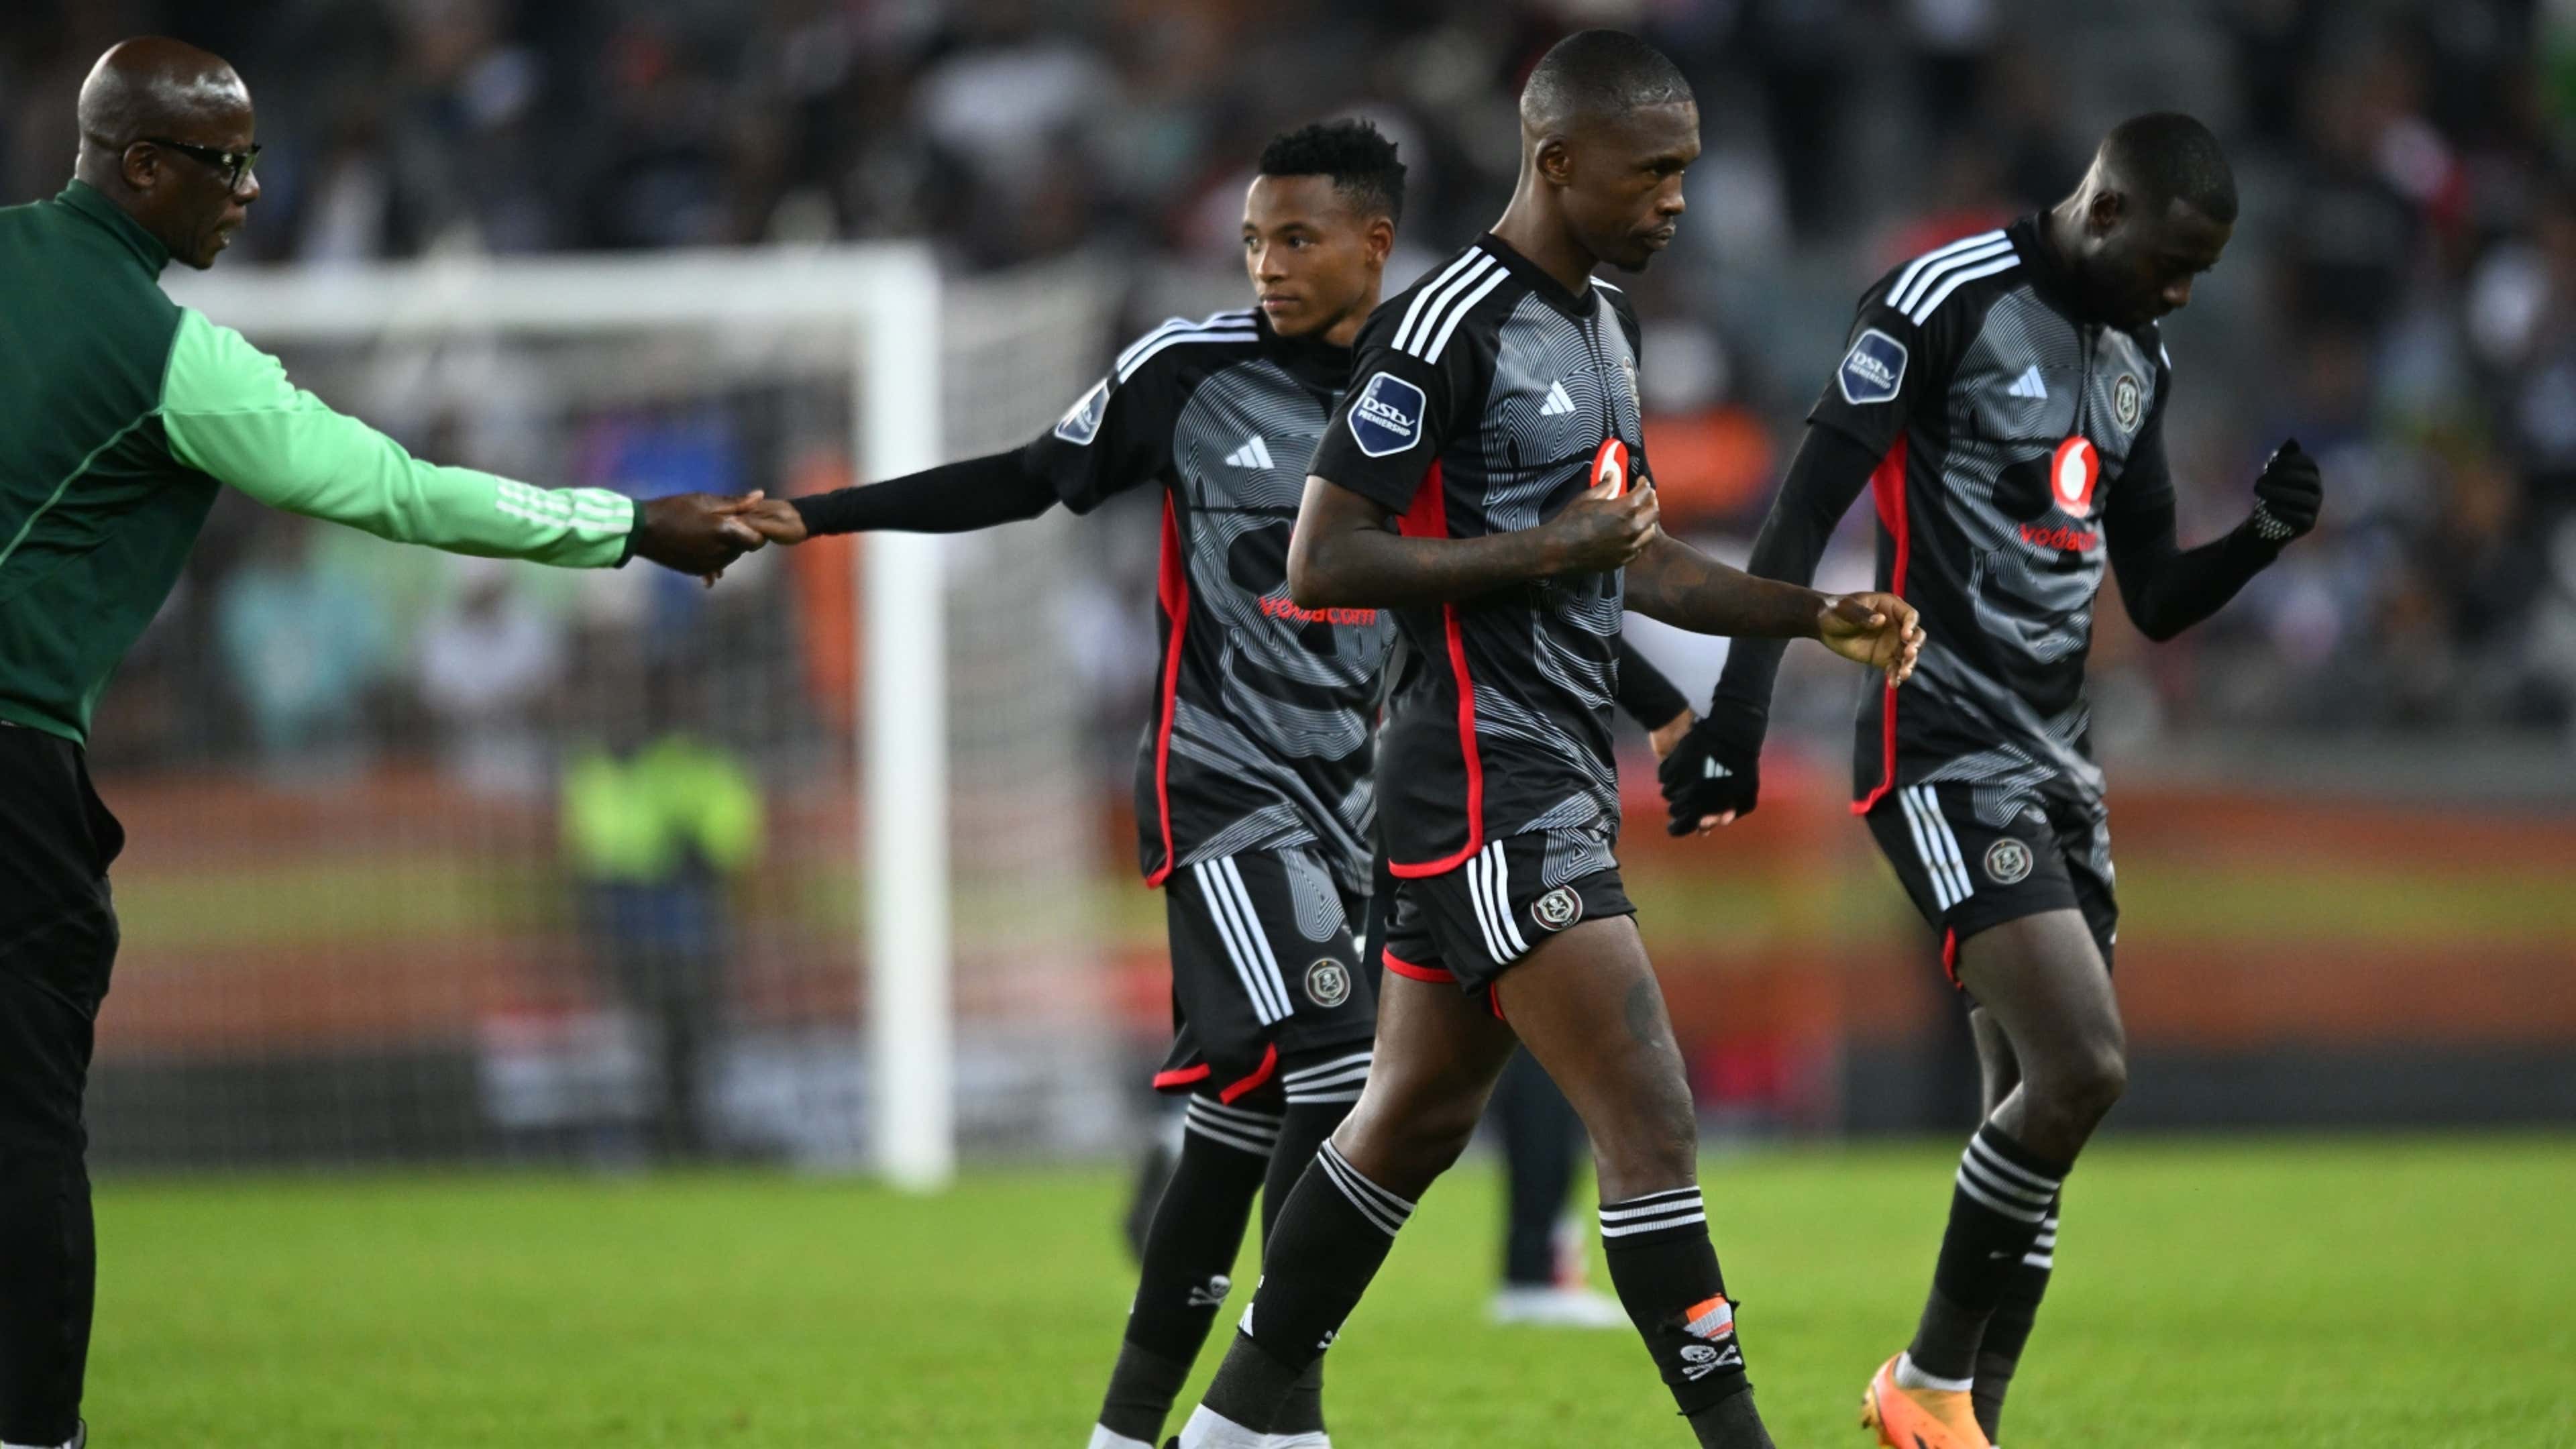 Cape Town Spurs are just like Jwaneng Galaxy victims, Orlando Pirates, they  will win against Kaizer Chiefs' - Fans